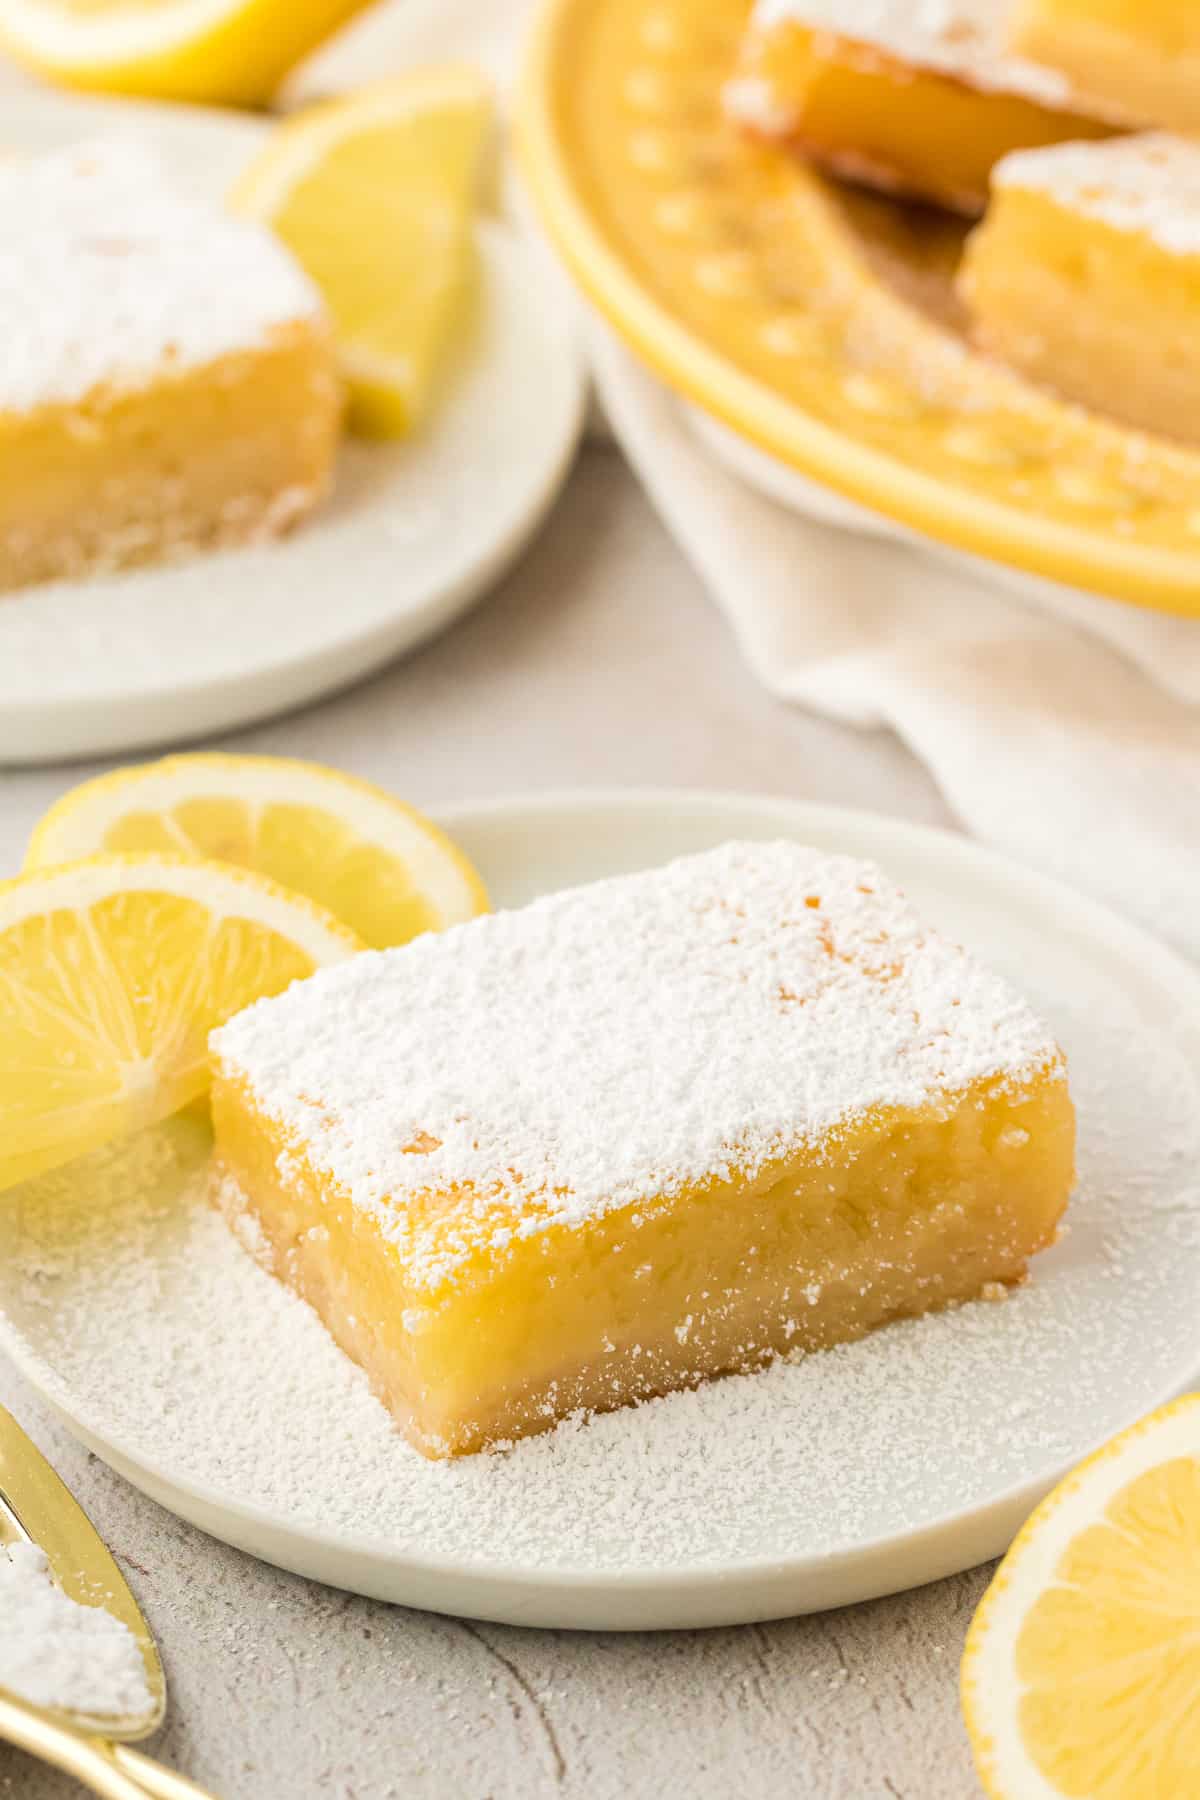 A lemon bar square on a small white plate dusted with powdered sugar and surrounded by lemon slices and whole lemons